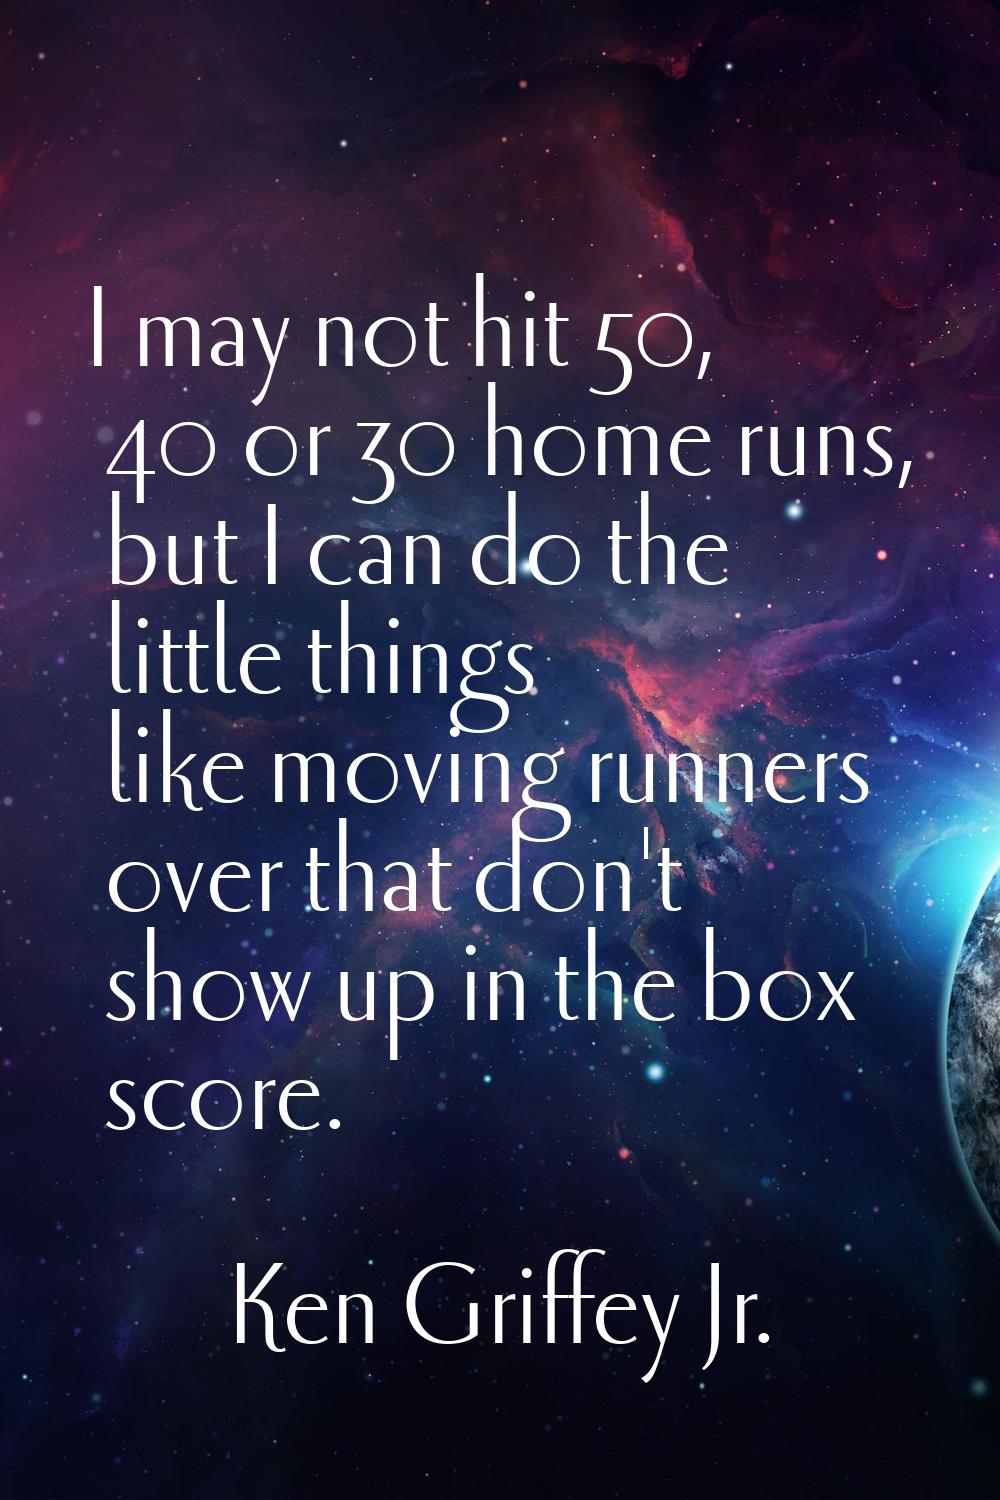 I may not hit 50, 40 or 30 home runs, but I can do the little things like moving runners over that 